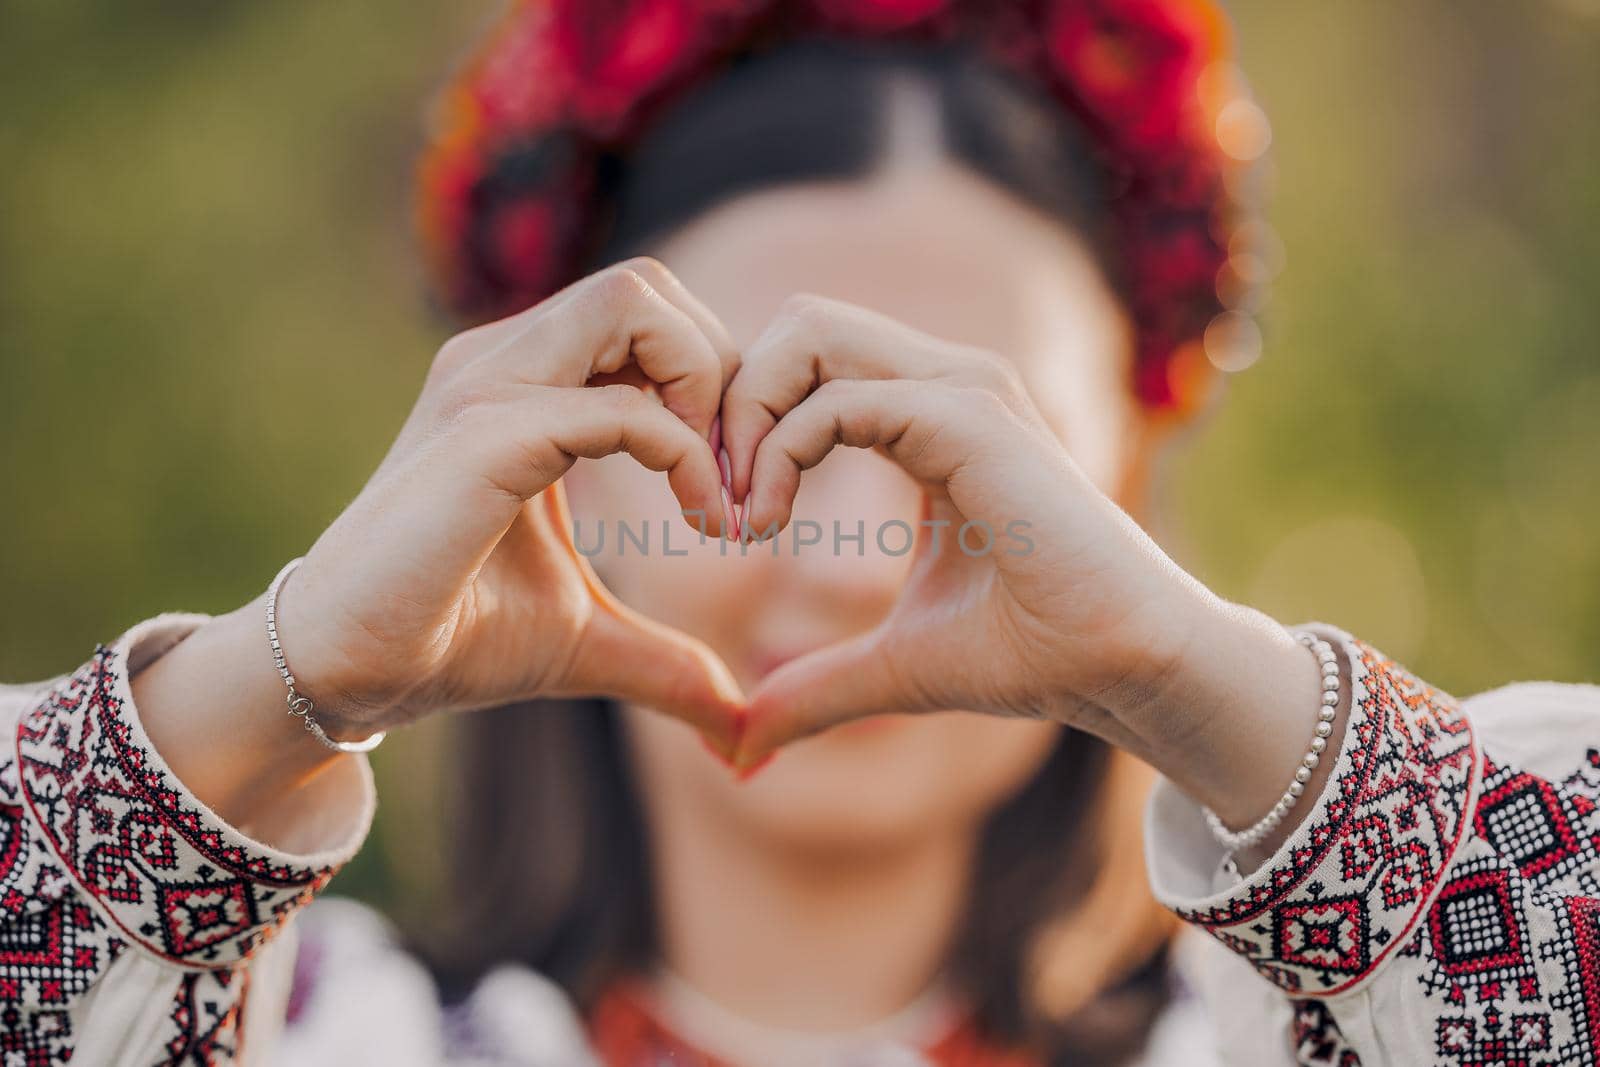 Ukrainian woman in traditional embroidery vyshyvanka dress making sign of shape heart. Ukraine, volunteering, donation help and love concept. High quality photo